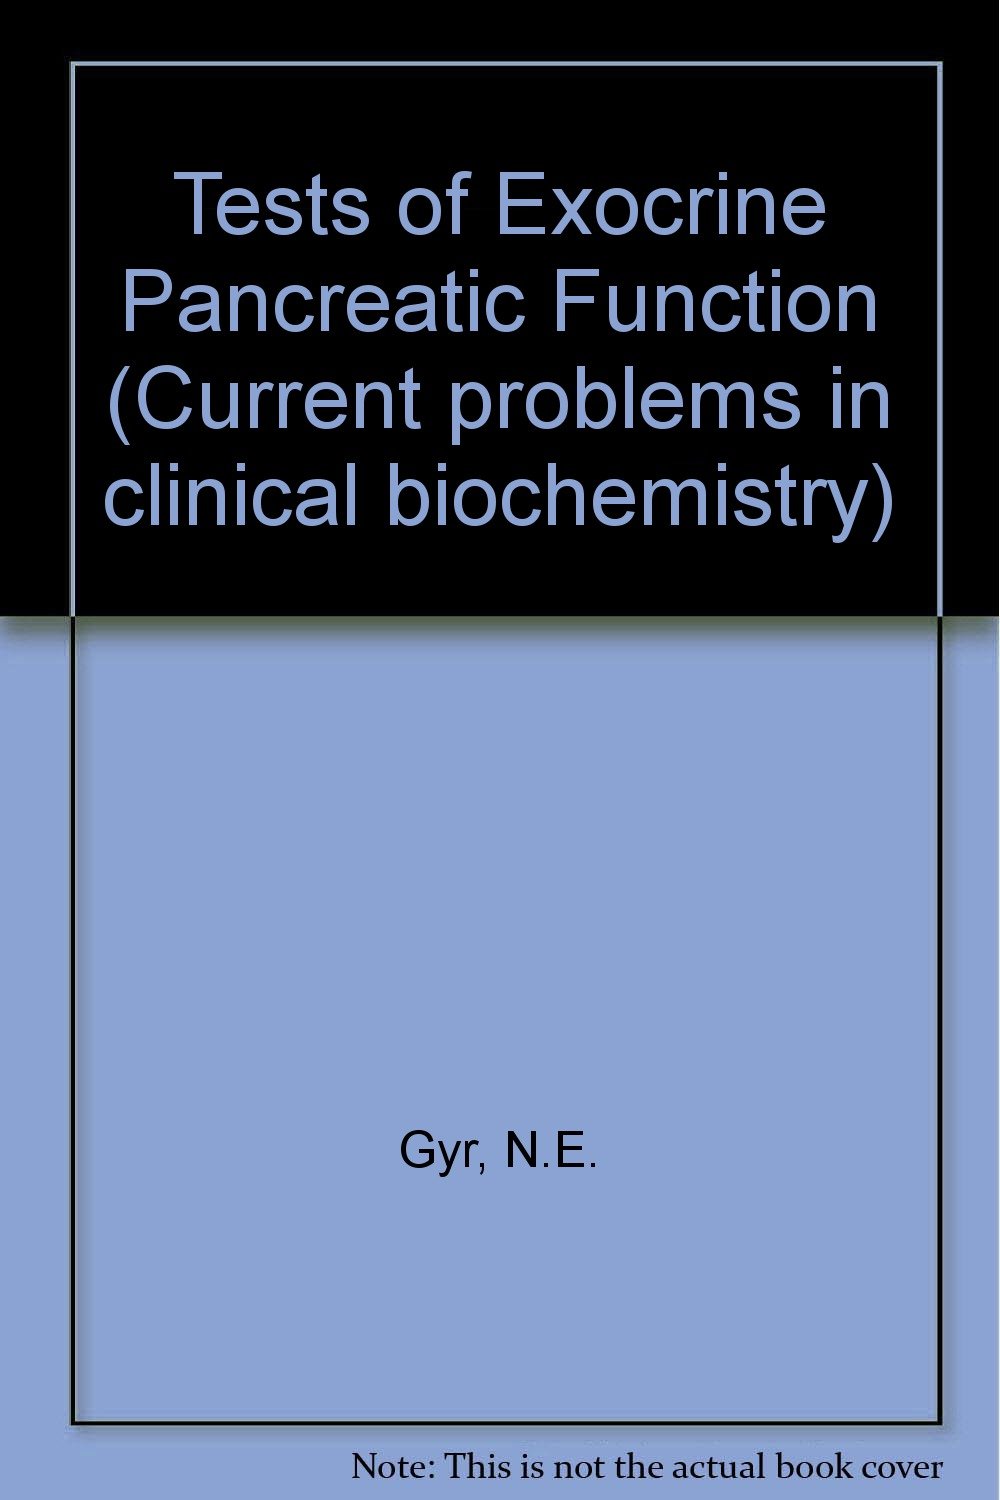 Tests of exocrine pancreatic function (Current problems in clinical biochemistry)